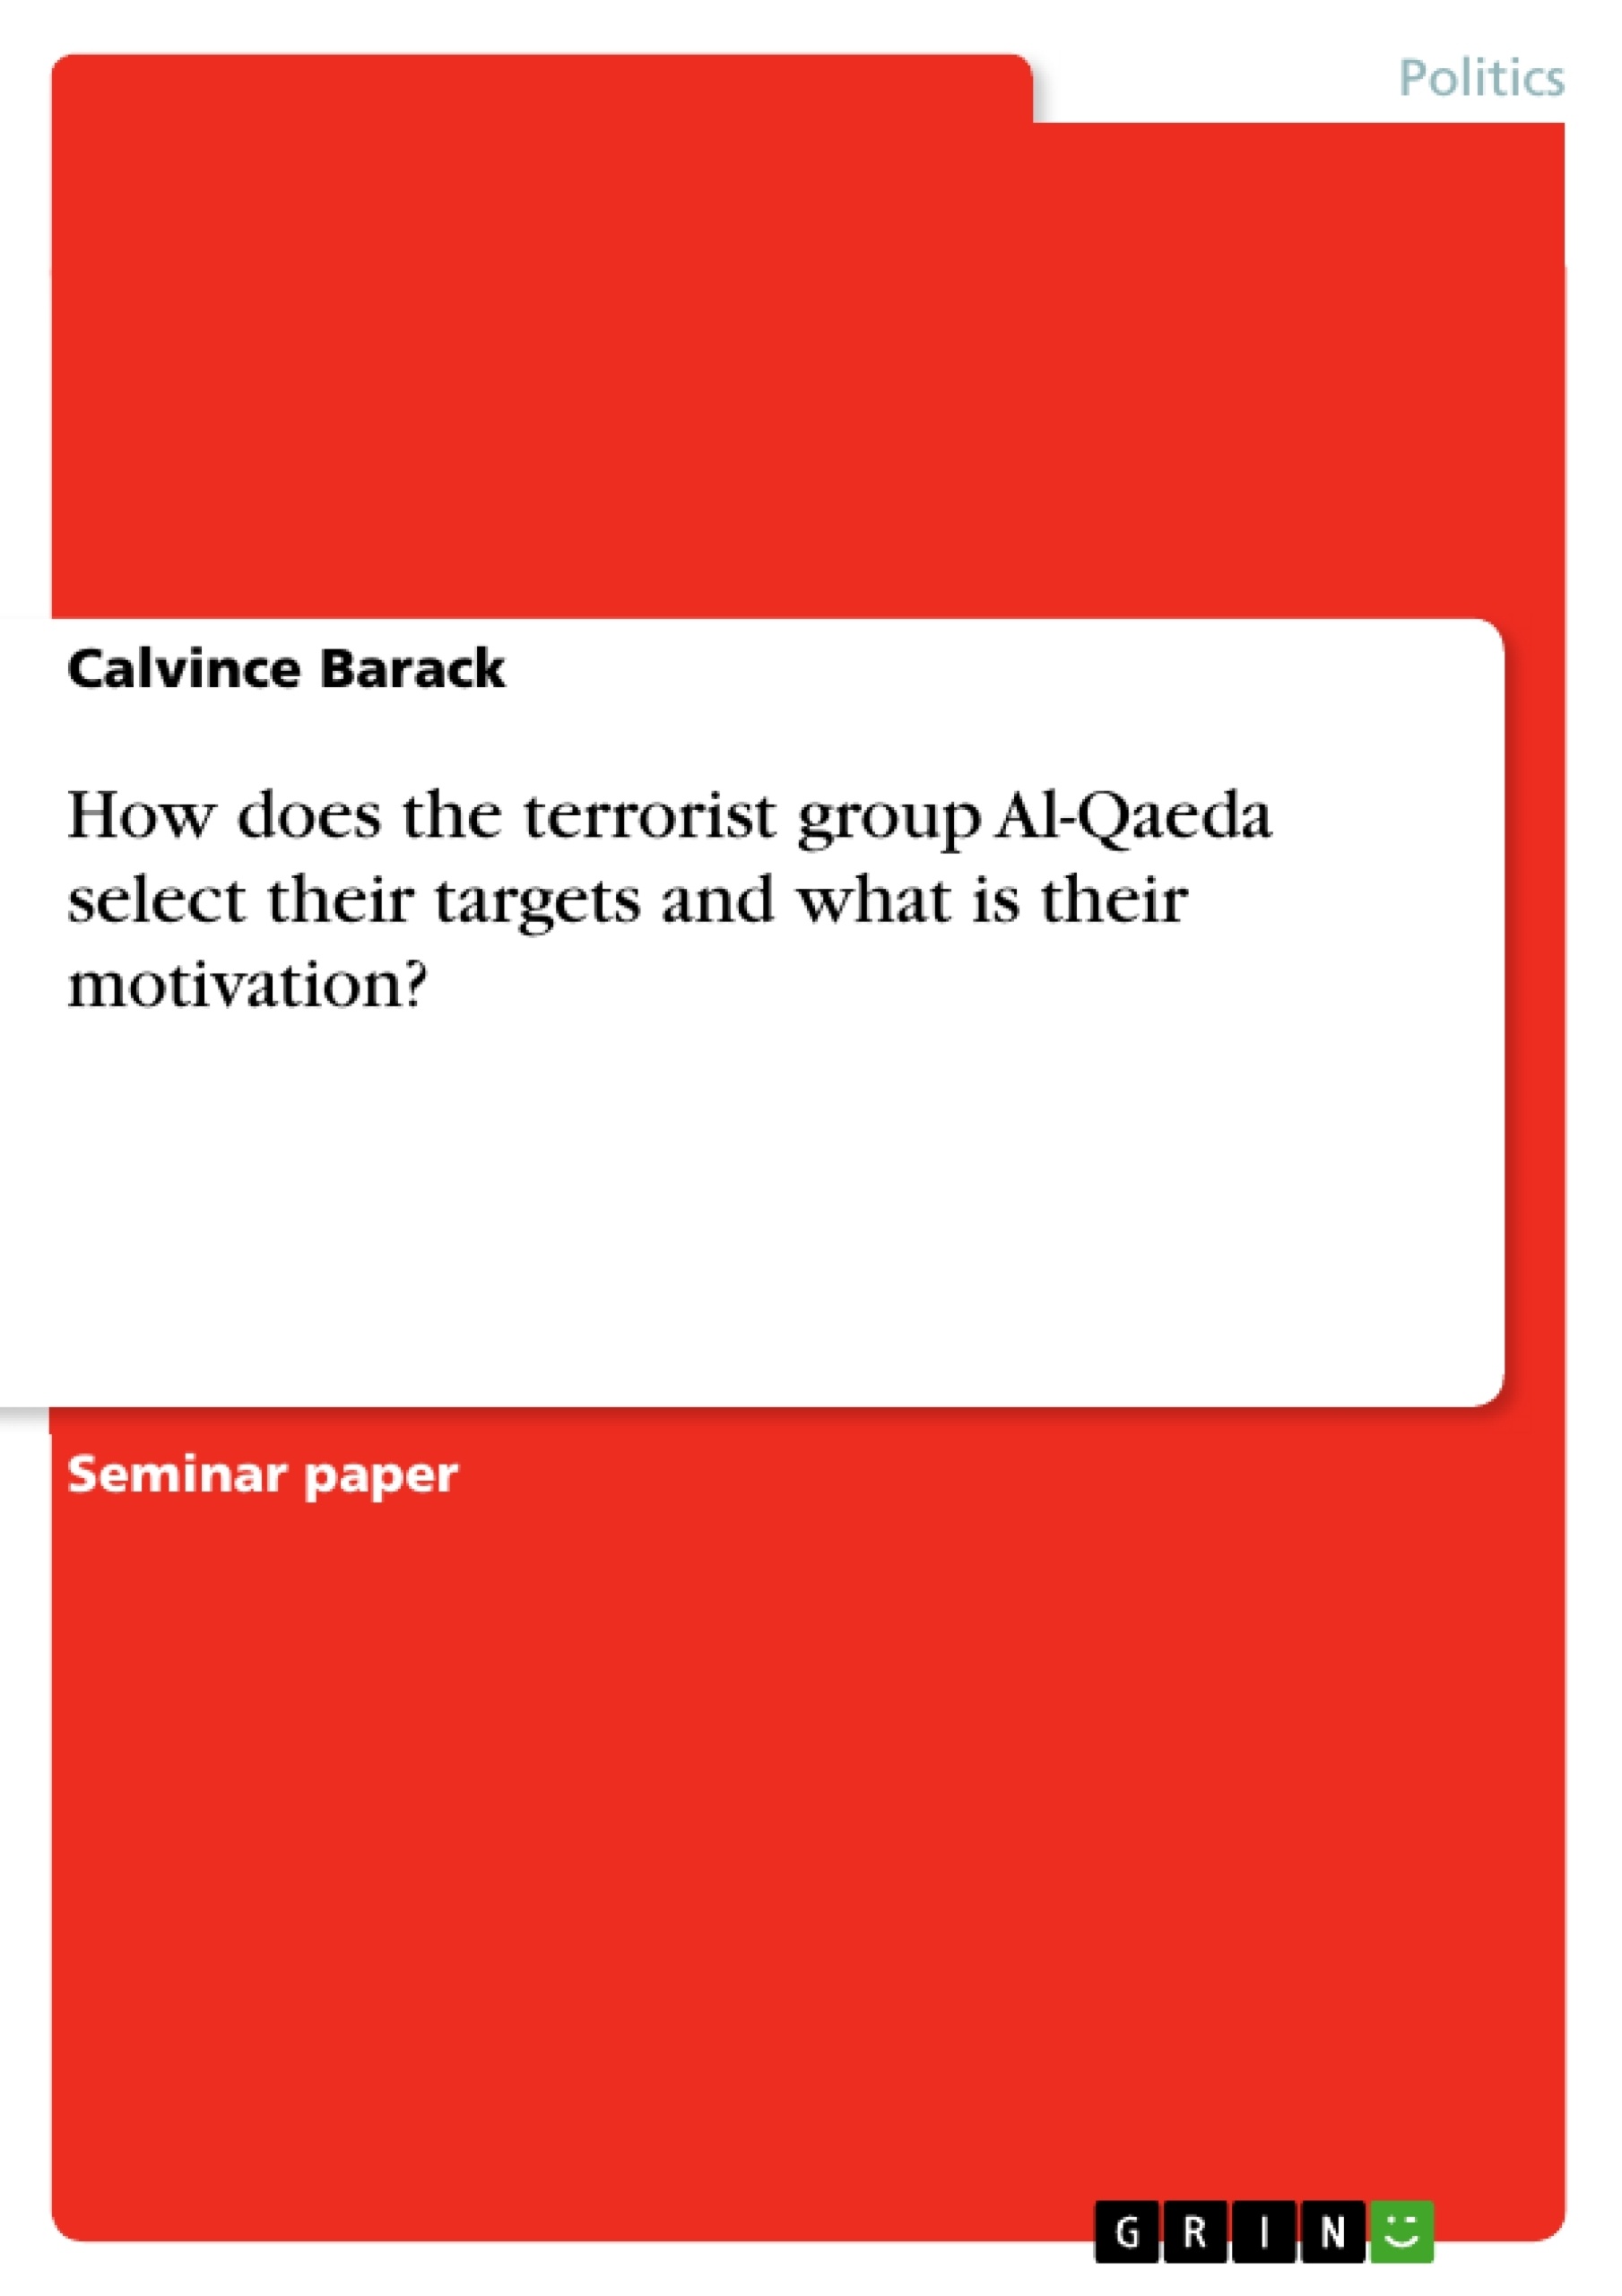 Title: How does the terrorist group Al-Qaeda select their targets and what is their motivation?